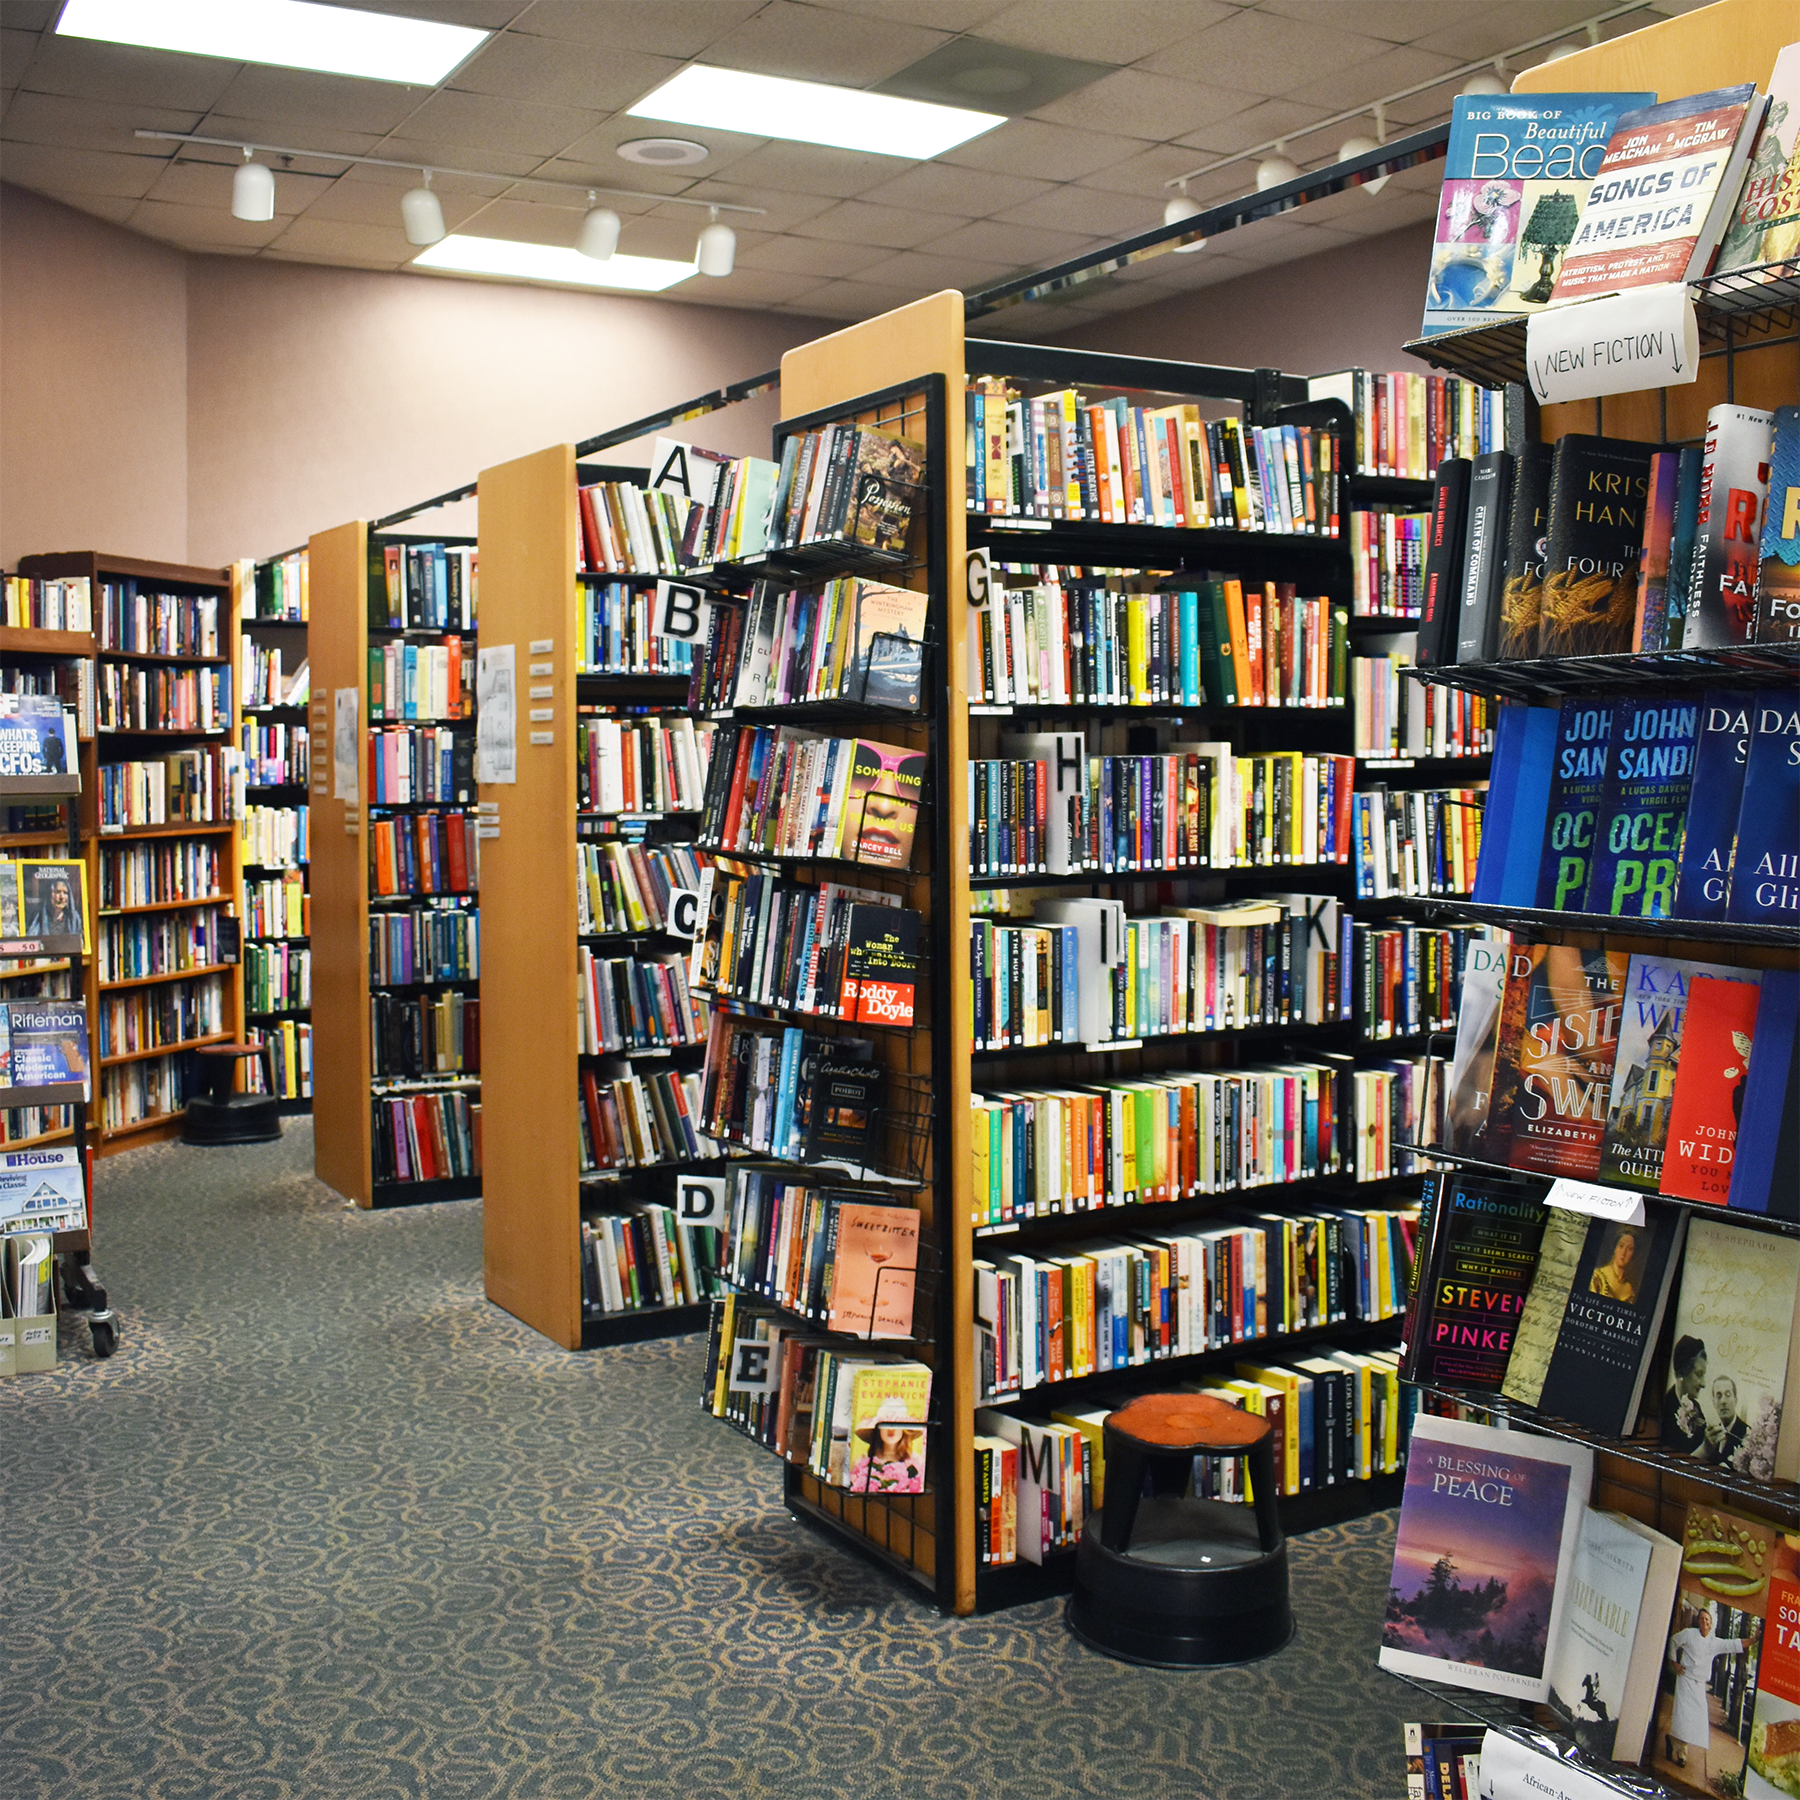 The Friends Bookstore – Friends of the Macon County Public Library